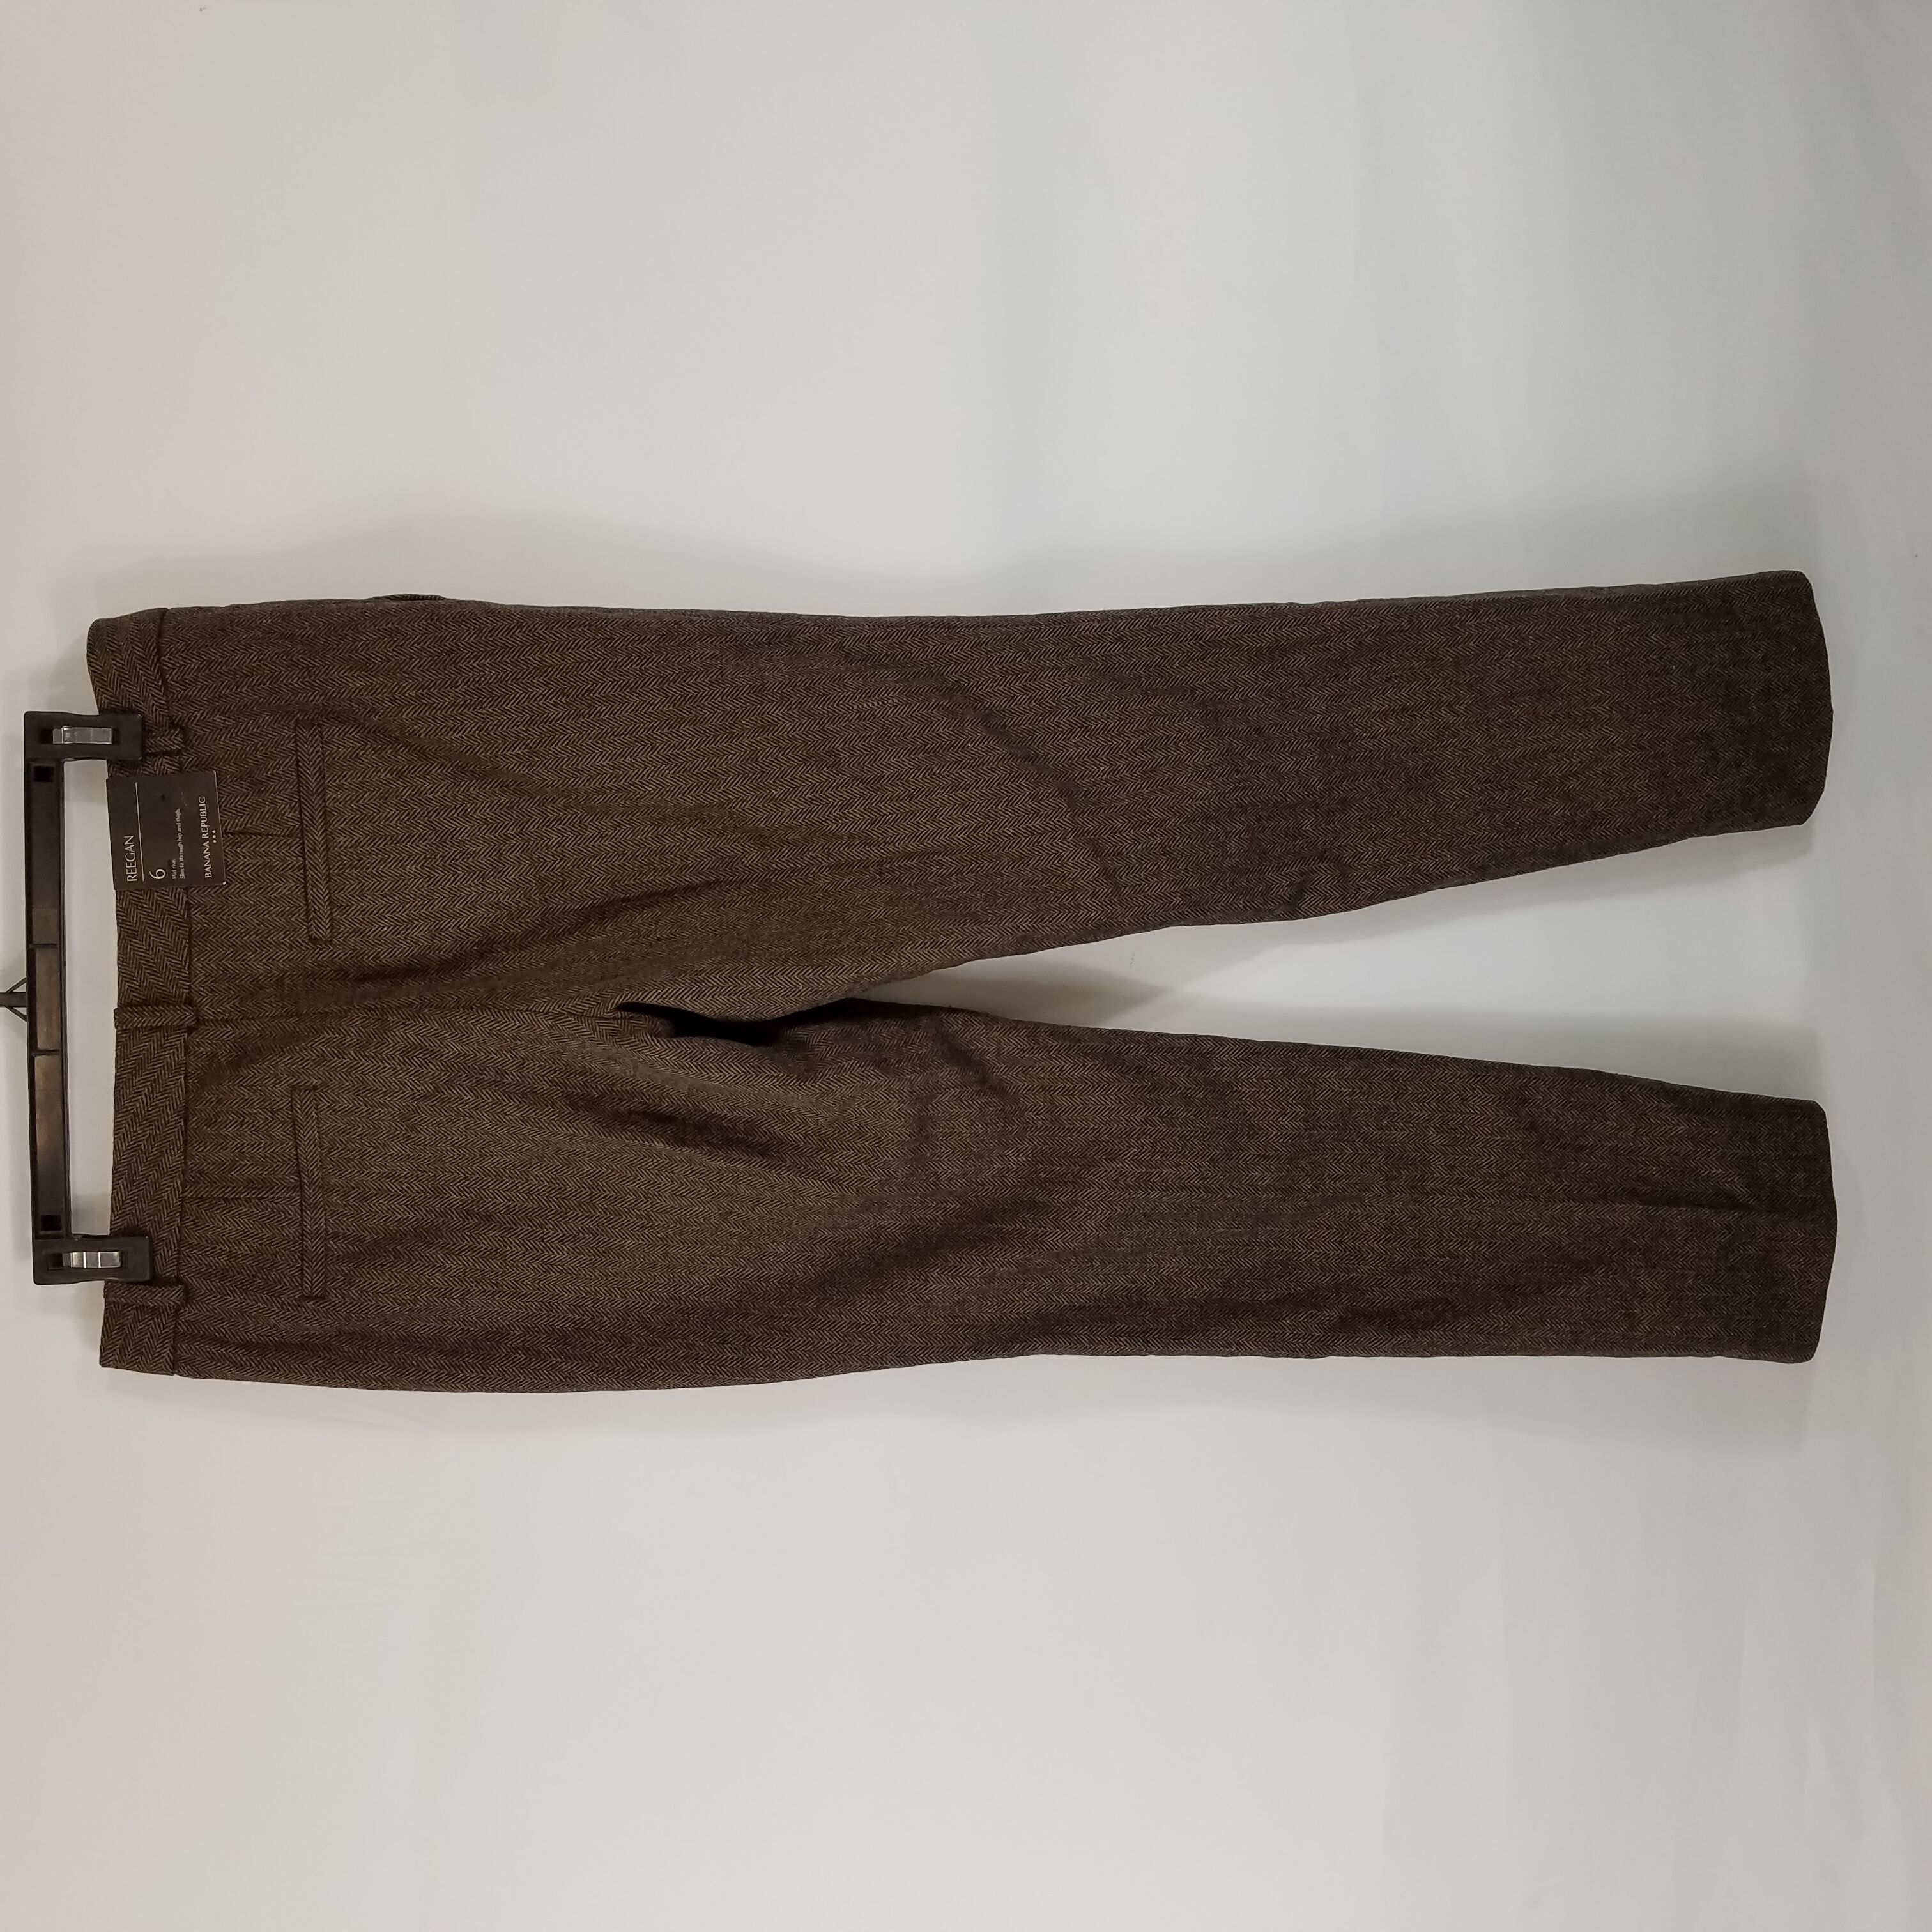 The beige end-on-end wool suit pants, an iconic piece from The Kooples! Buy  one of these new models now on our website!